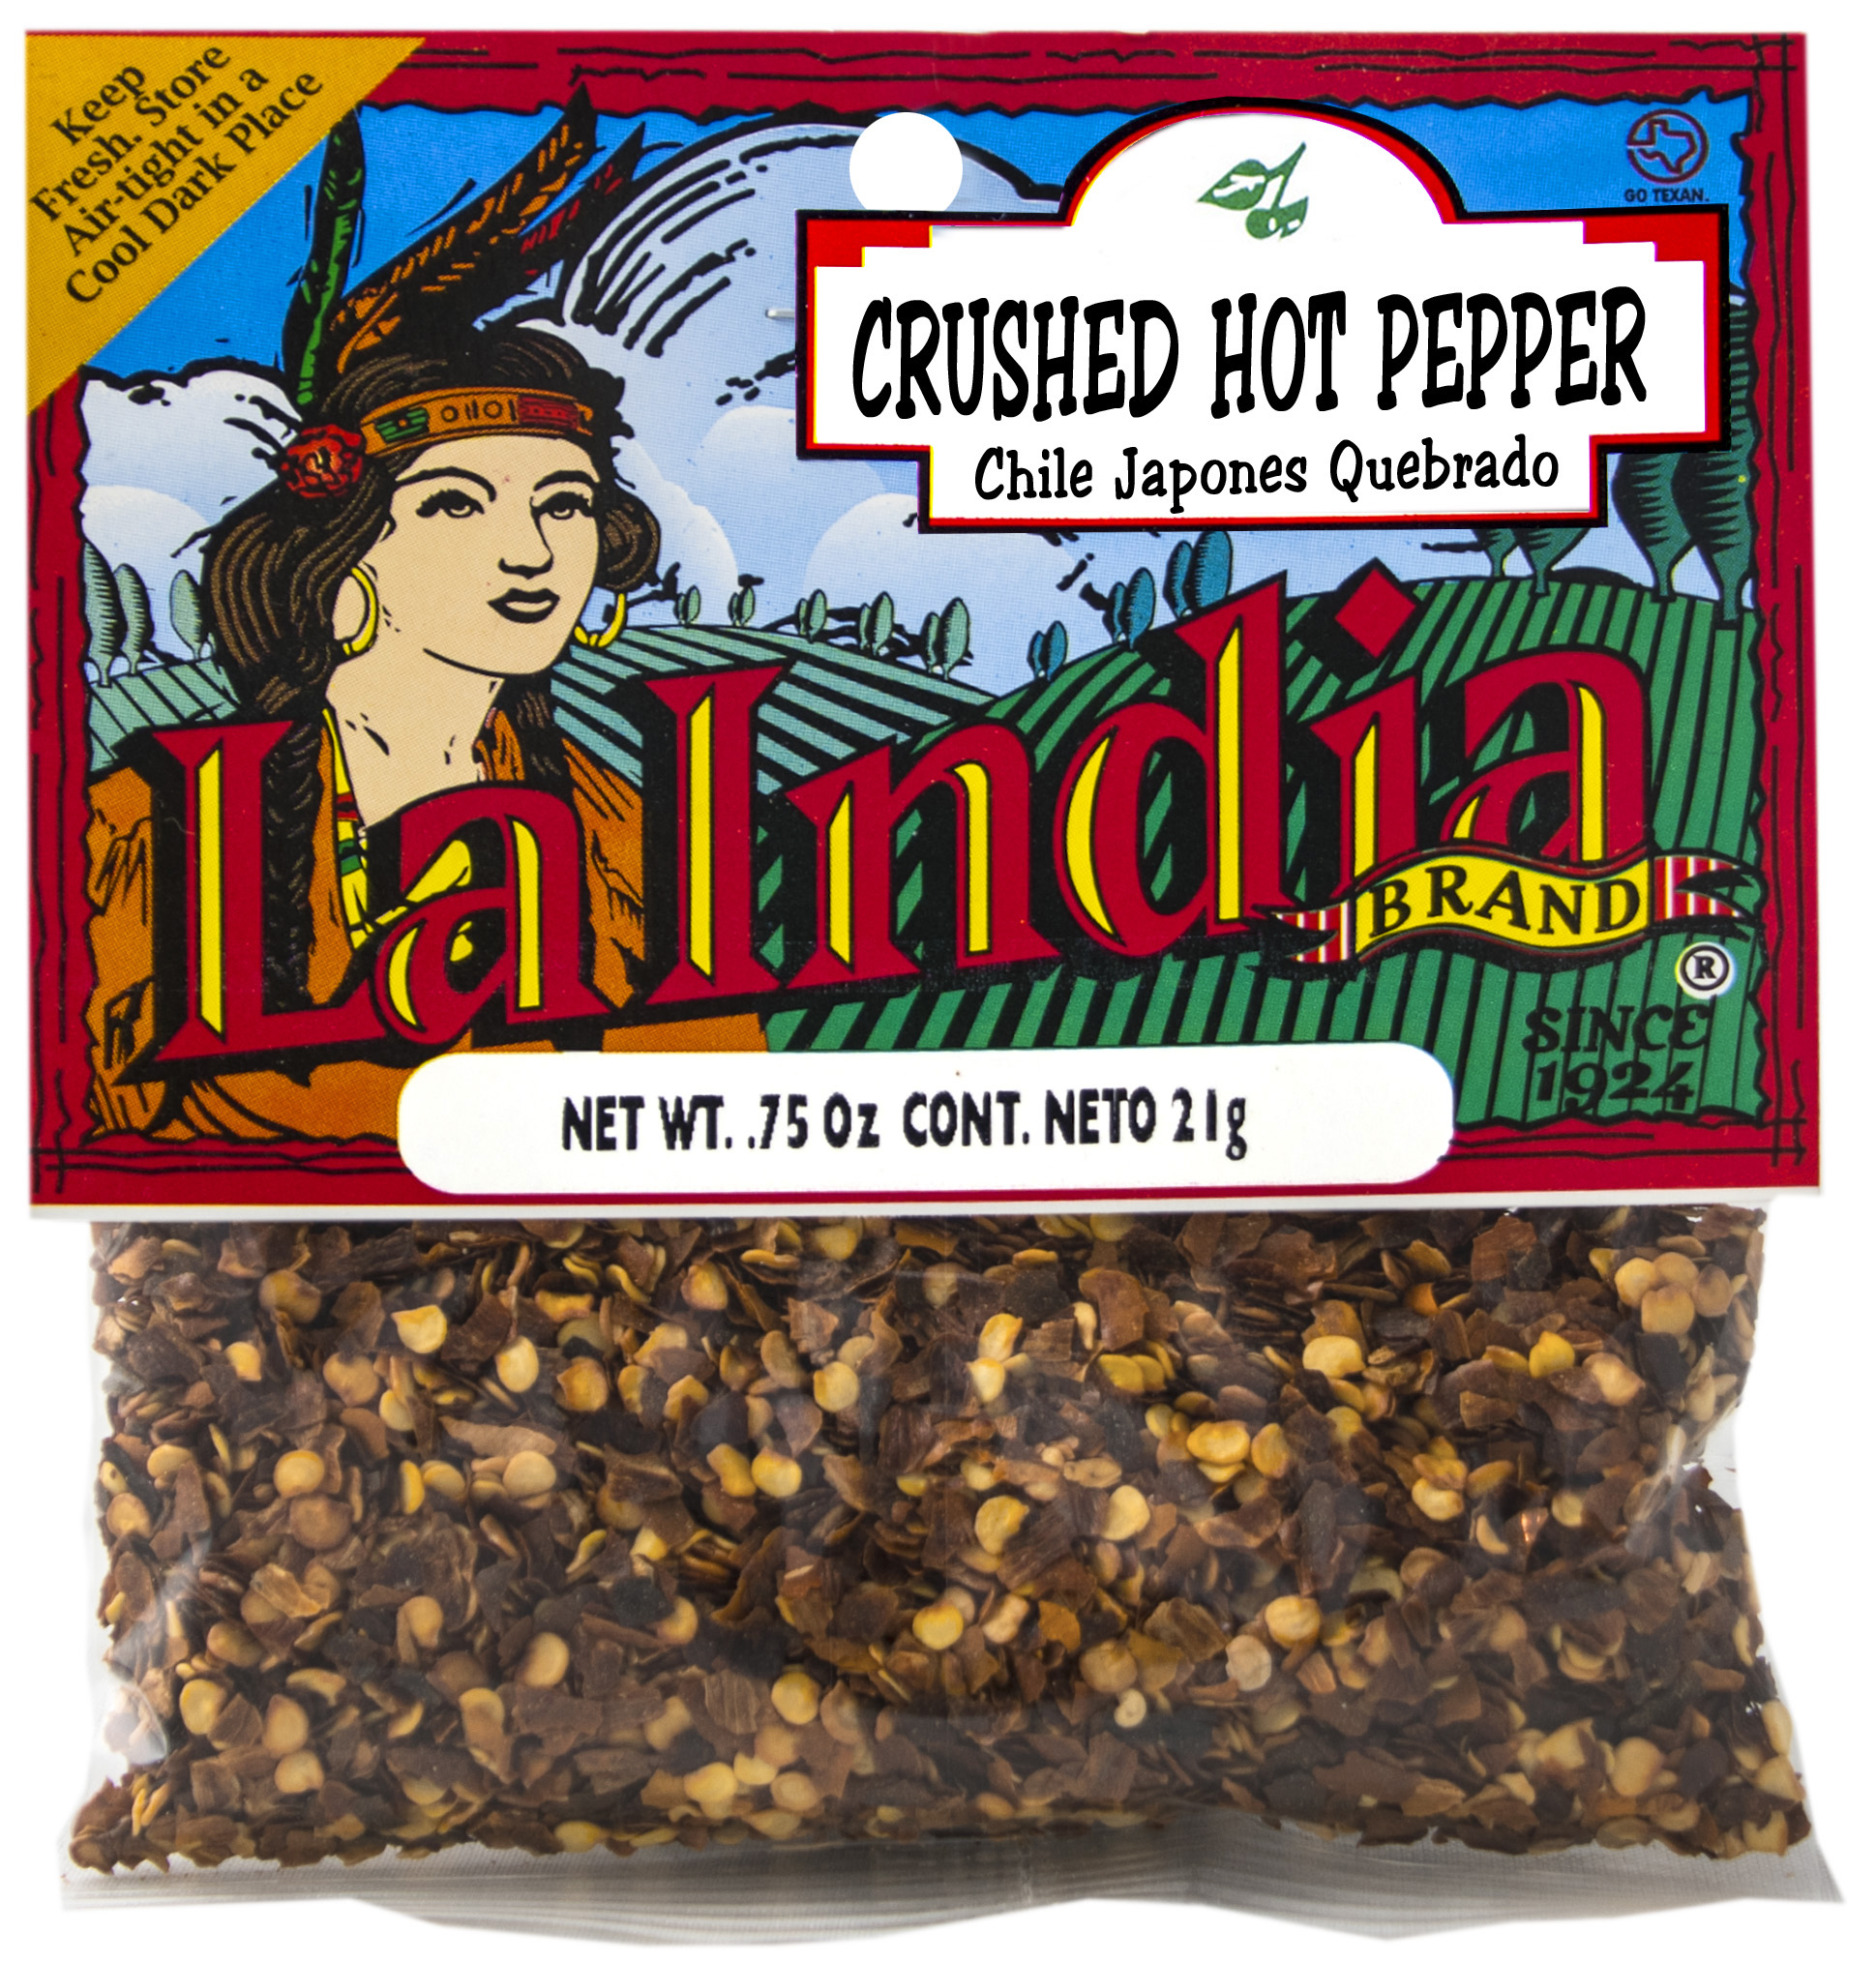 Hot Pepper Crushed Cello Bags (Unit)